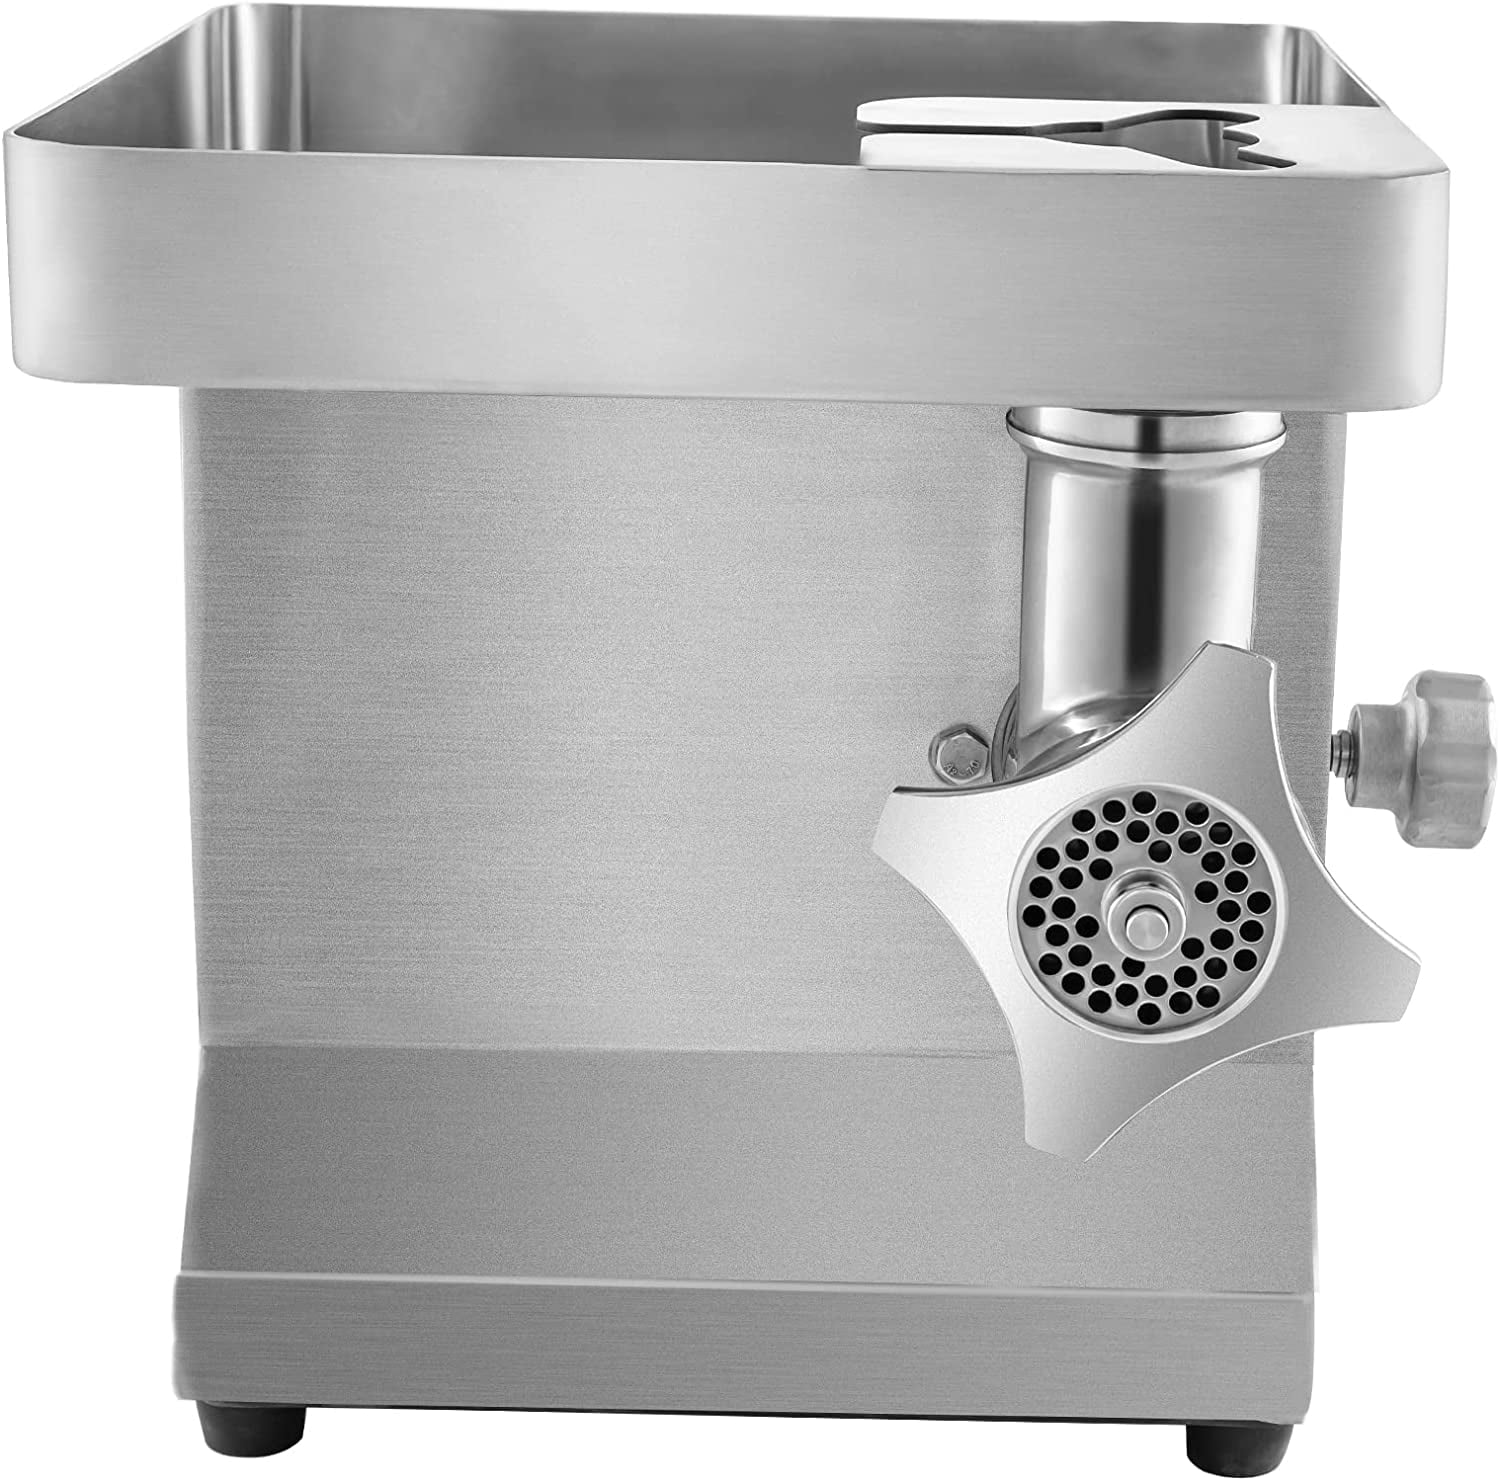 HaroldDol Electric Meat Grinder, 500W &14 Cup Large Stainless